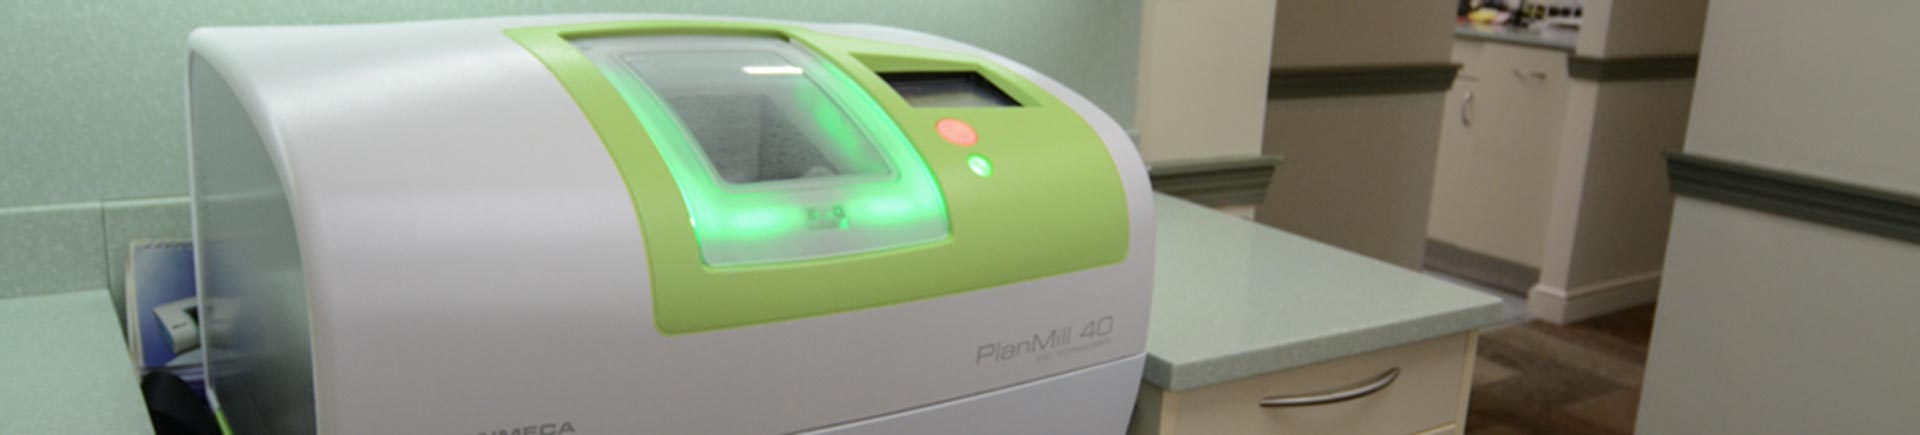 Planmeca system used for 3D imaging of a tooth.